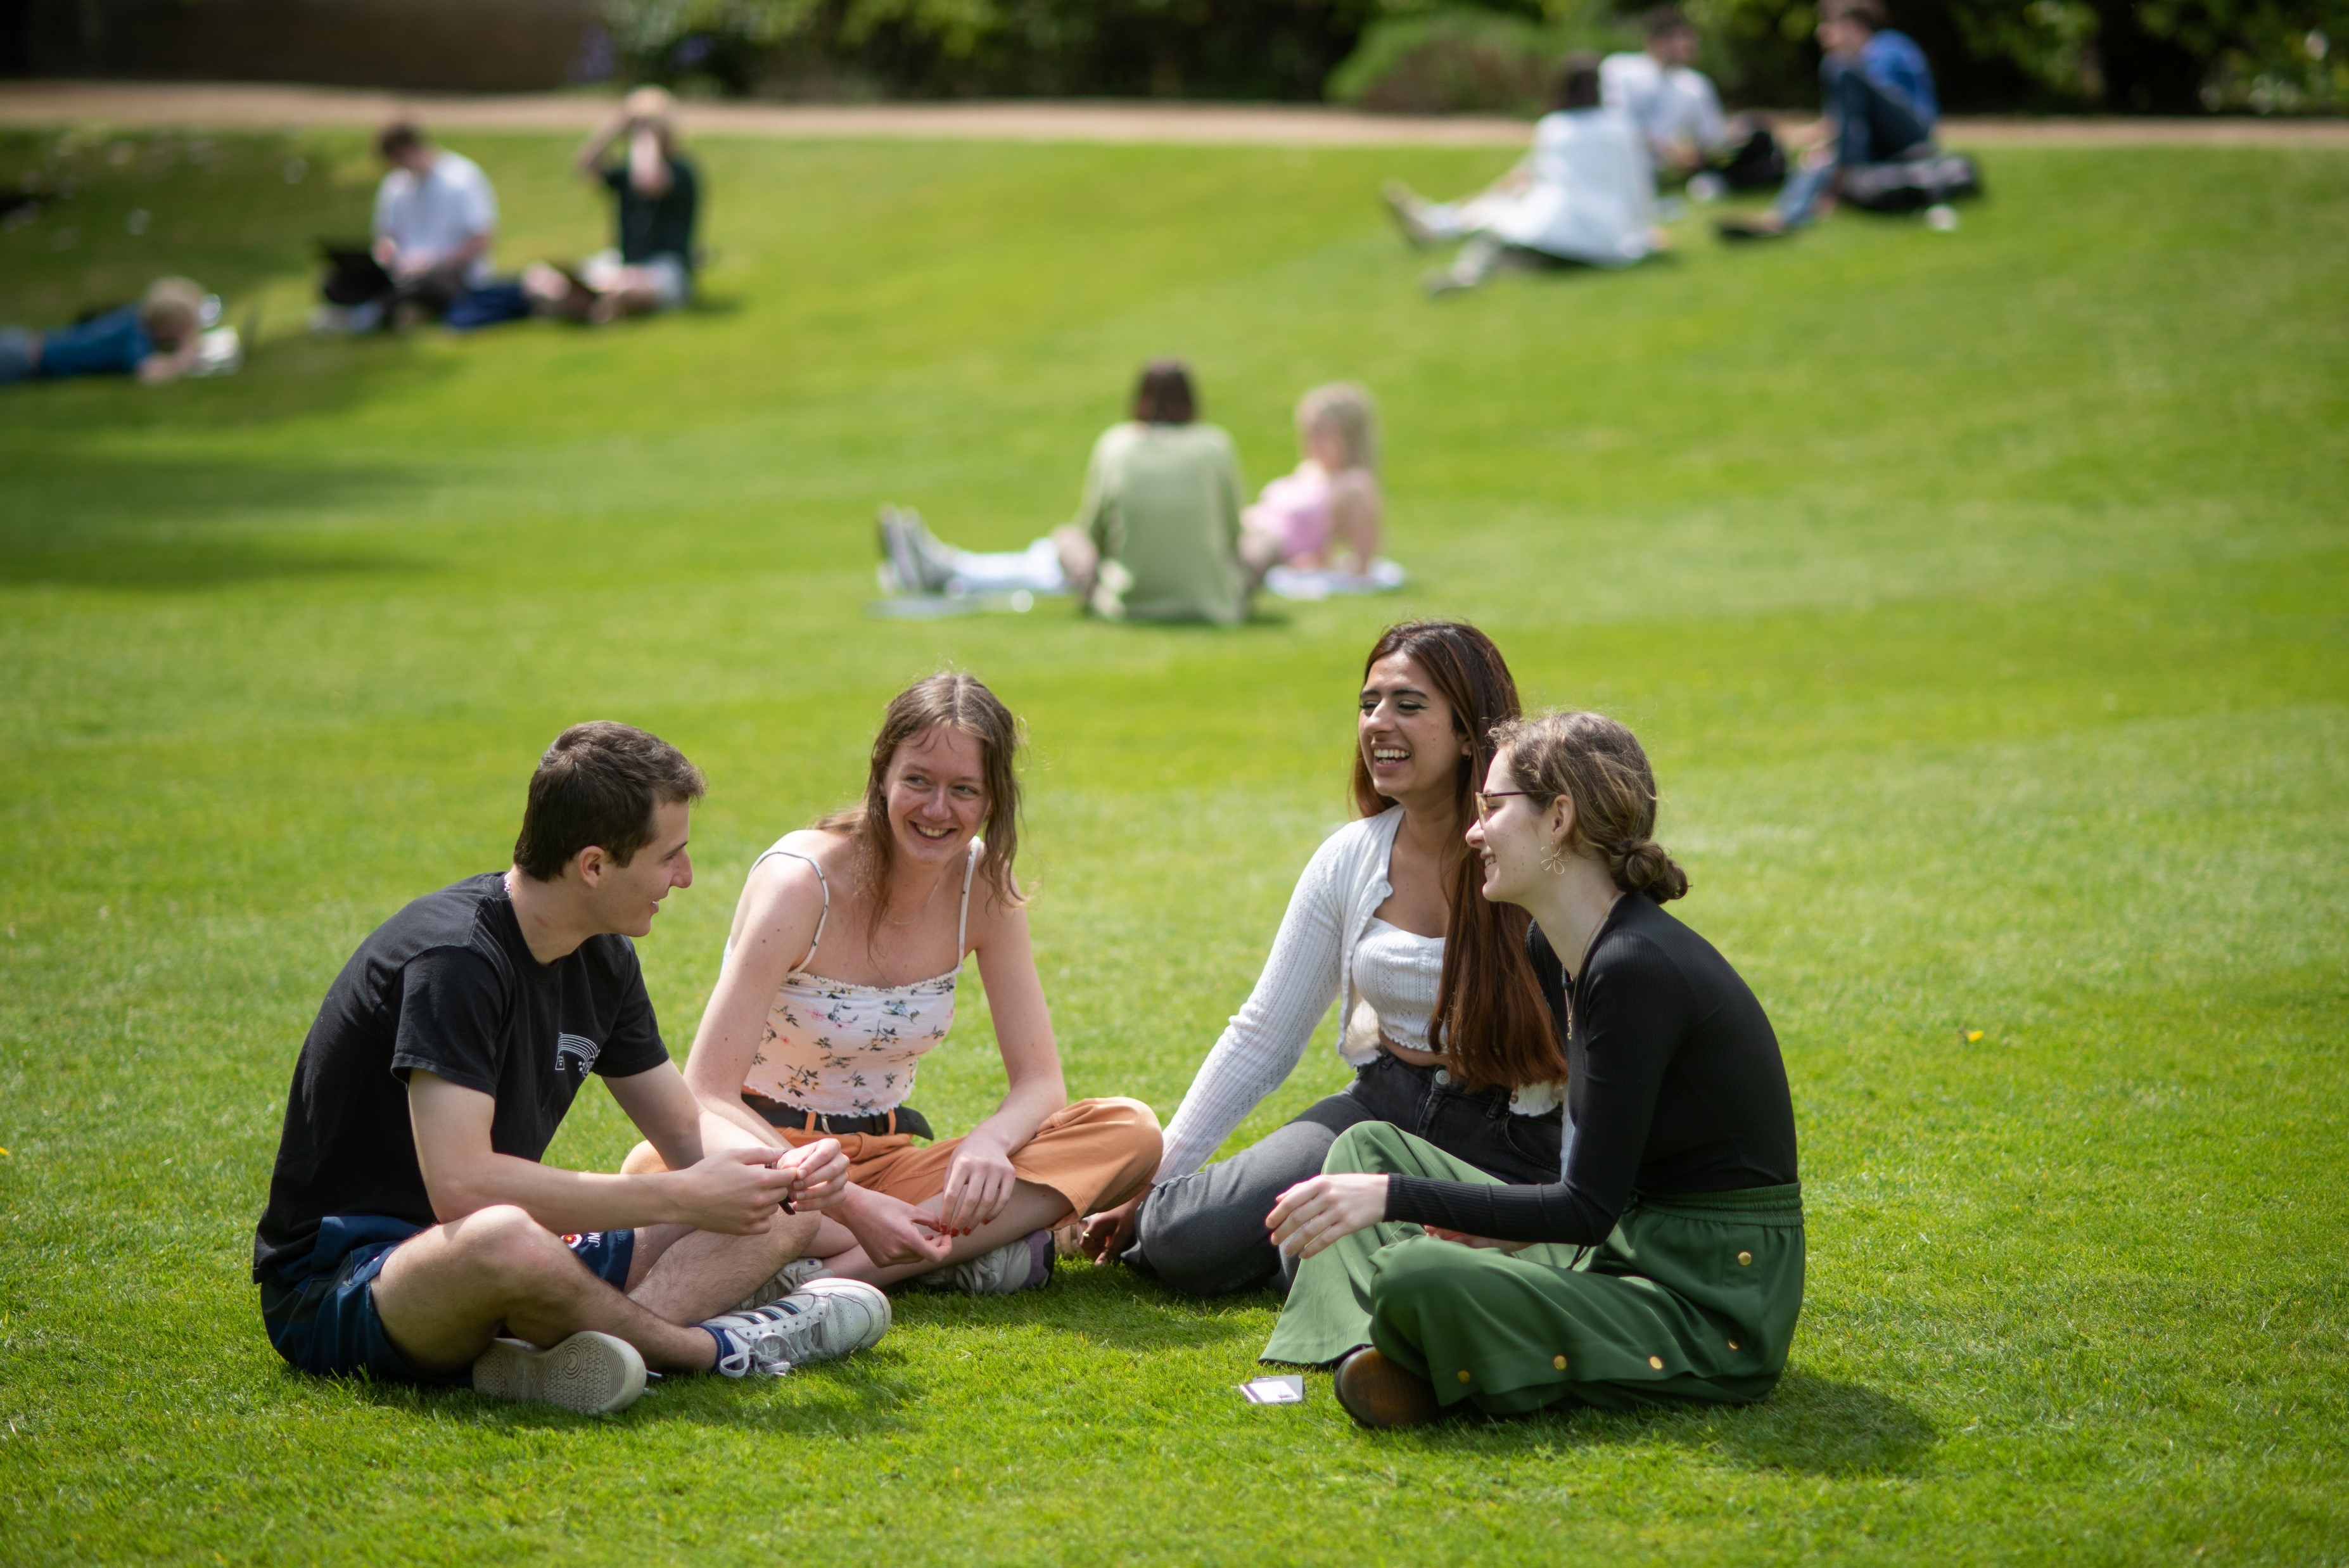 Groups of students sitting on grass